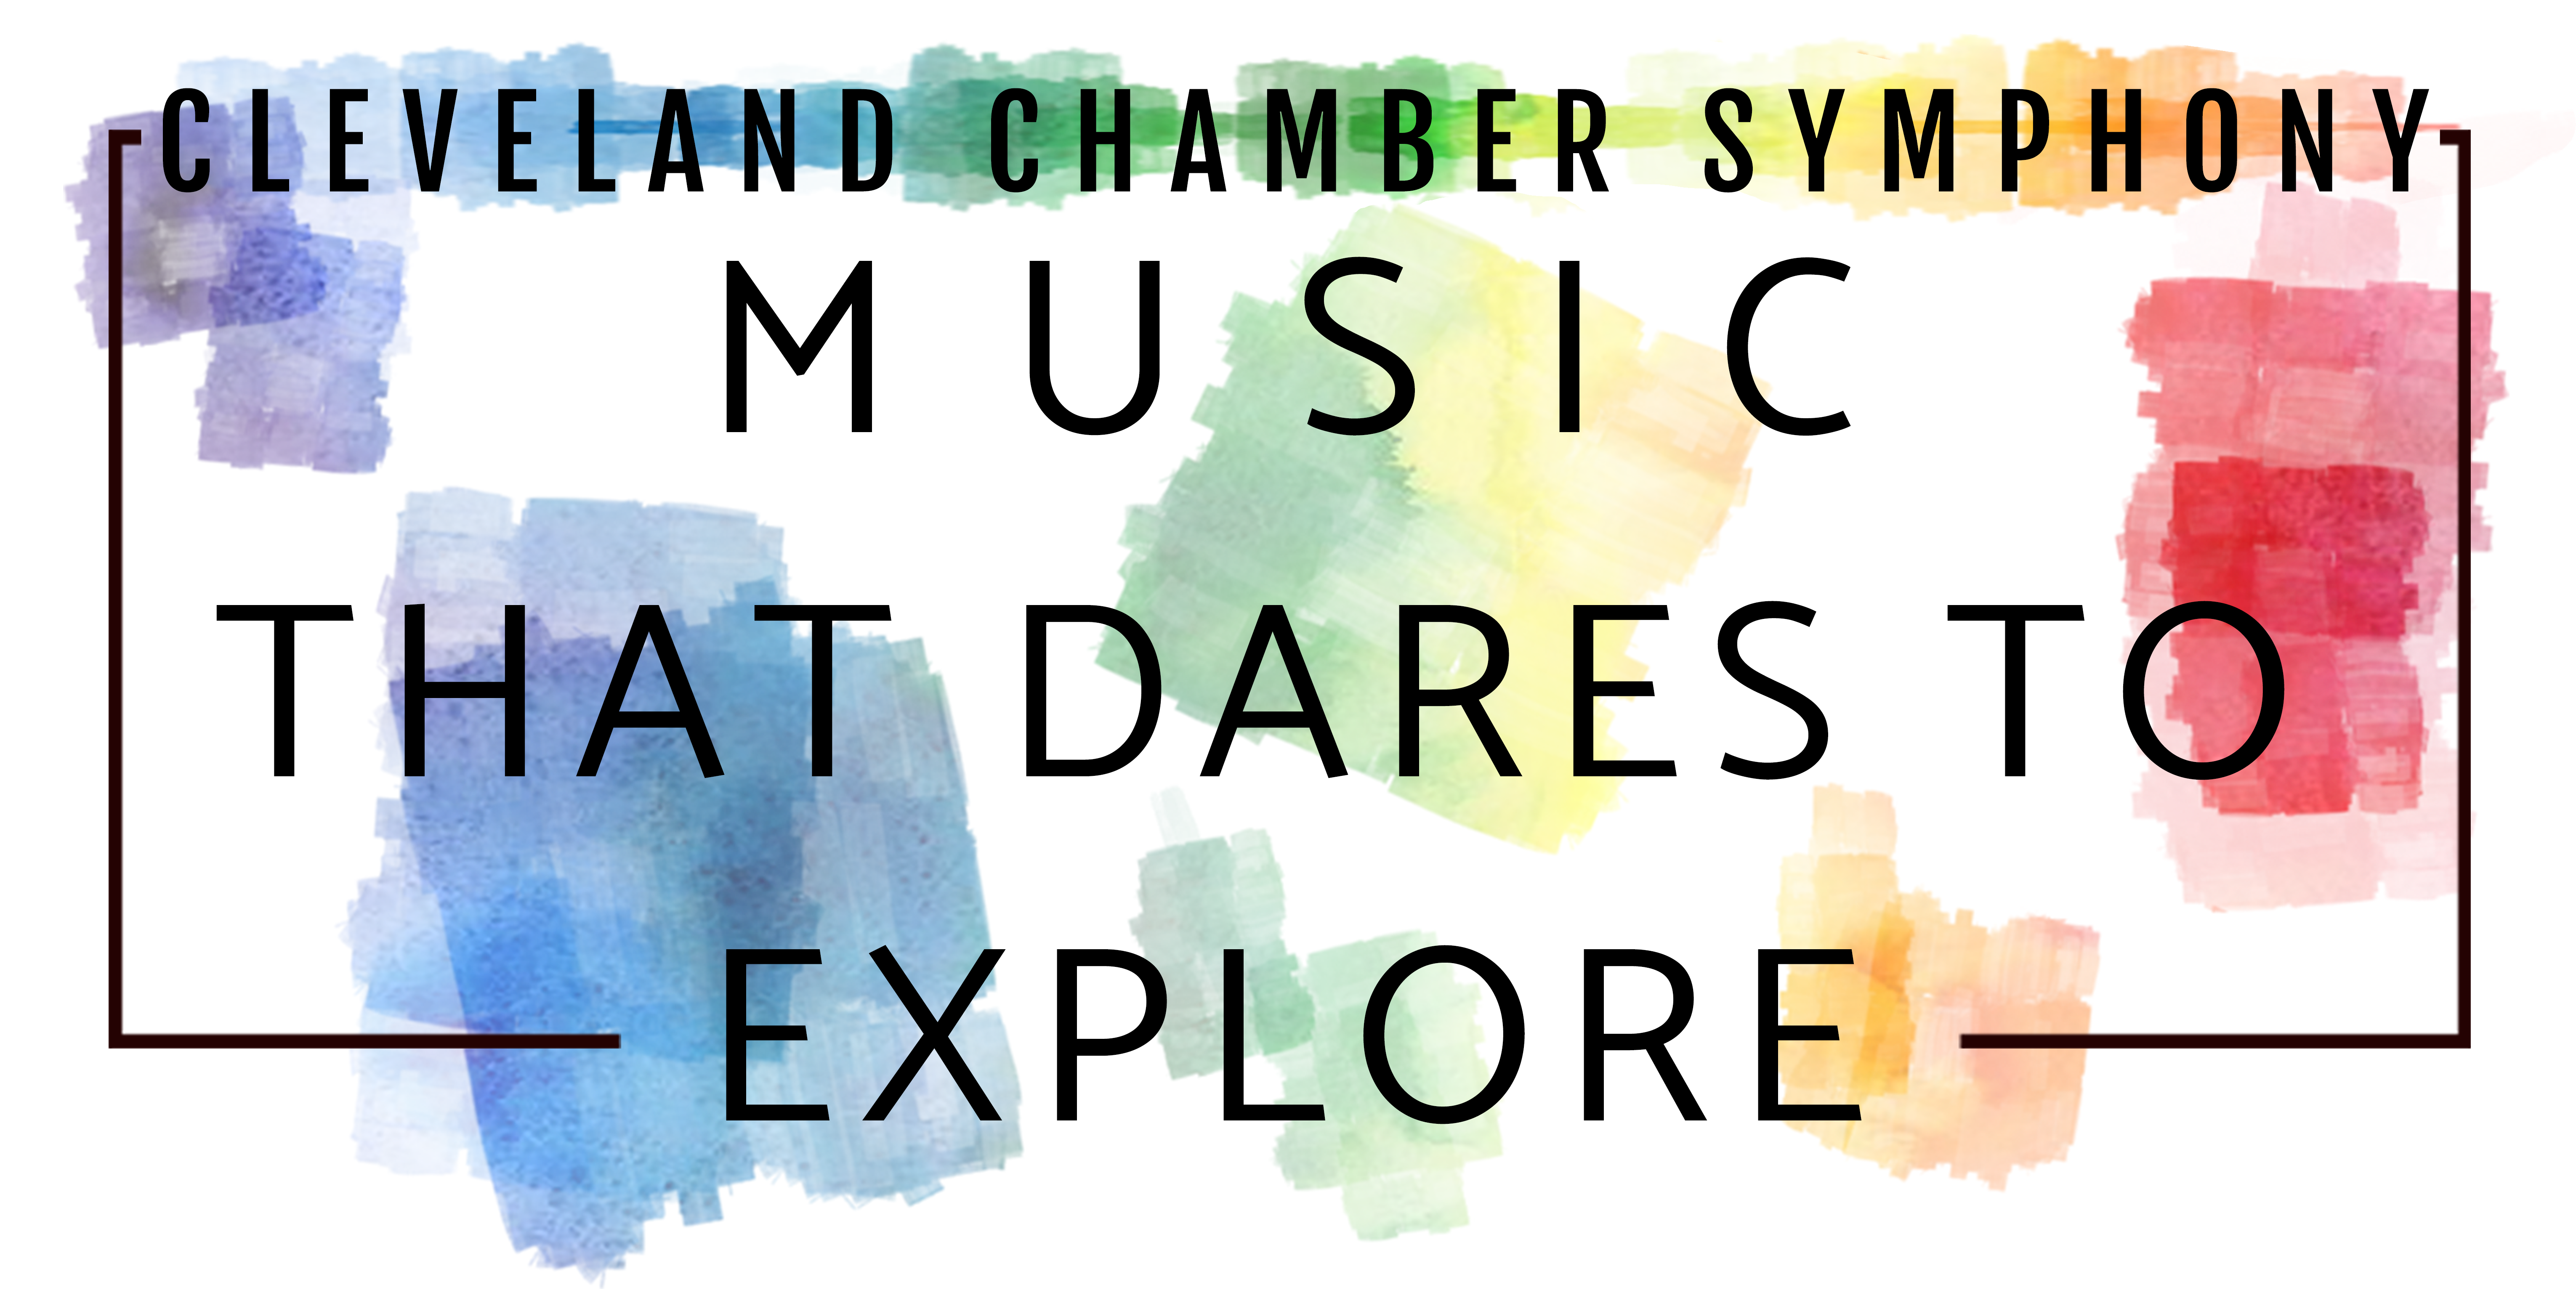 Cleveland Chamber Symphony Music that dares to Explore!